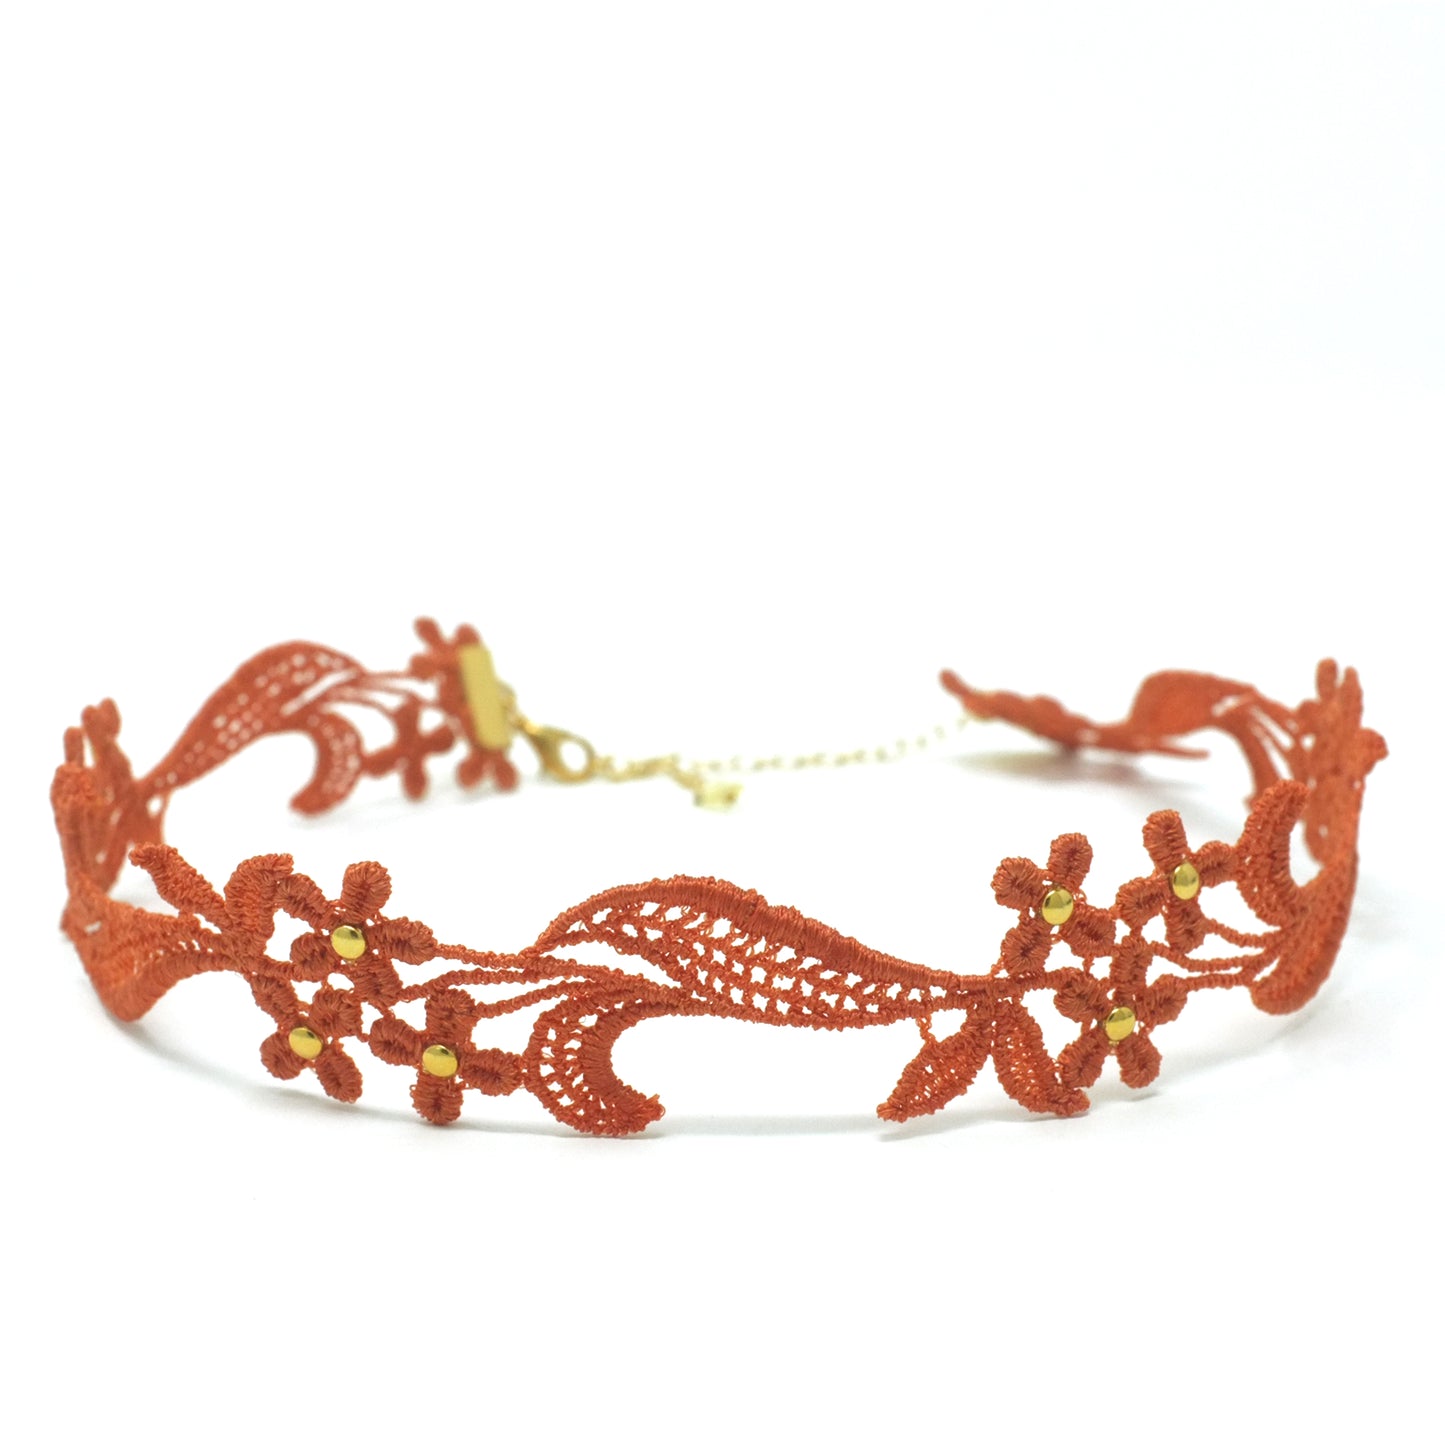 Burnt Orange Lace necklace with floral pattern decorated with gold beads